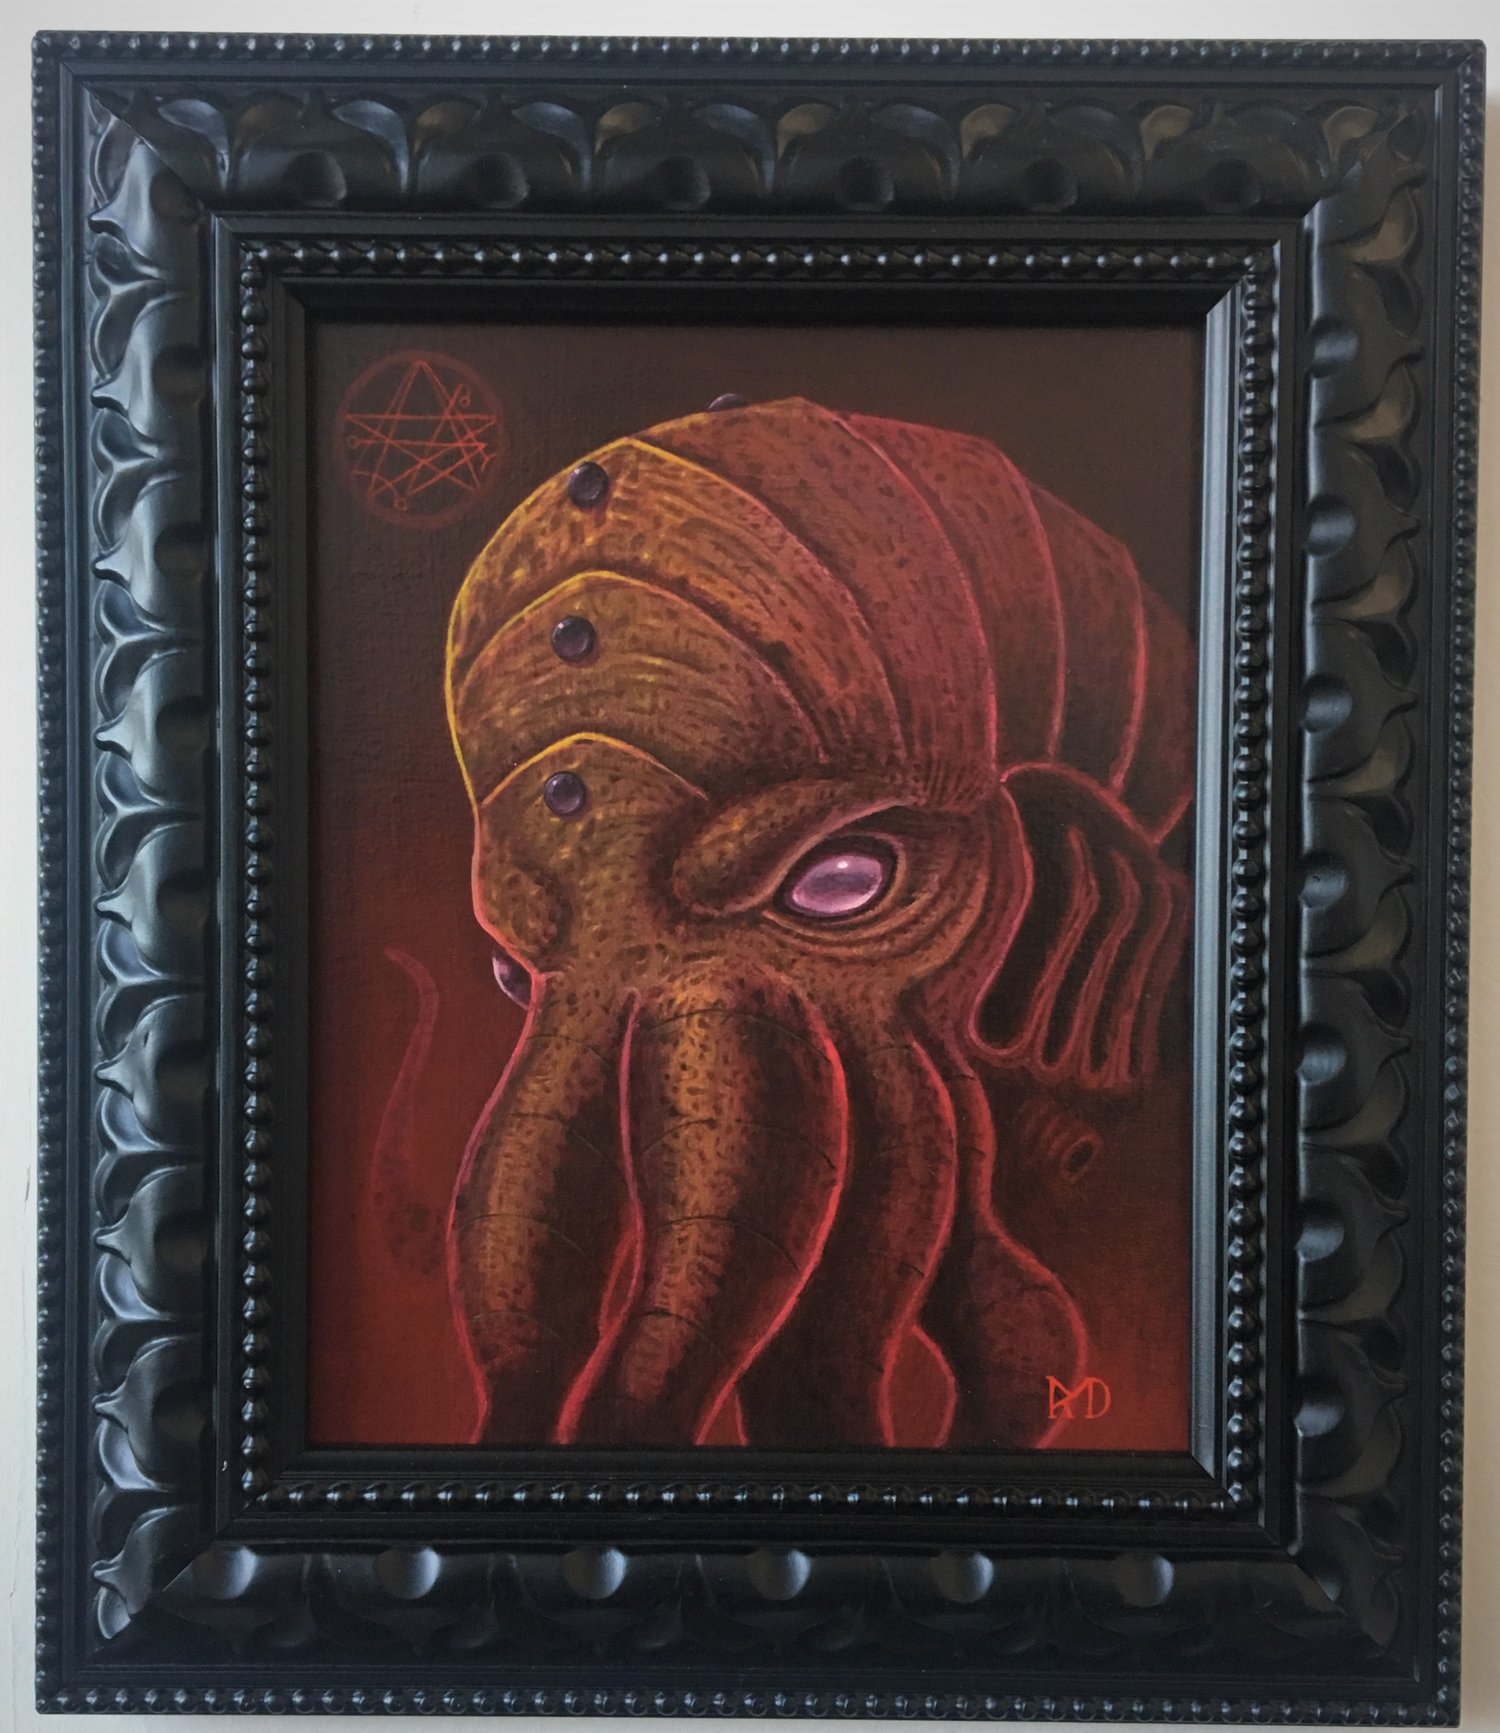 Image of Lord Cthulhu of R'lyeh